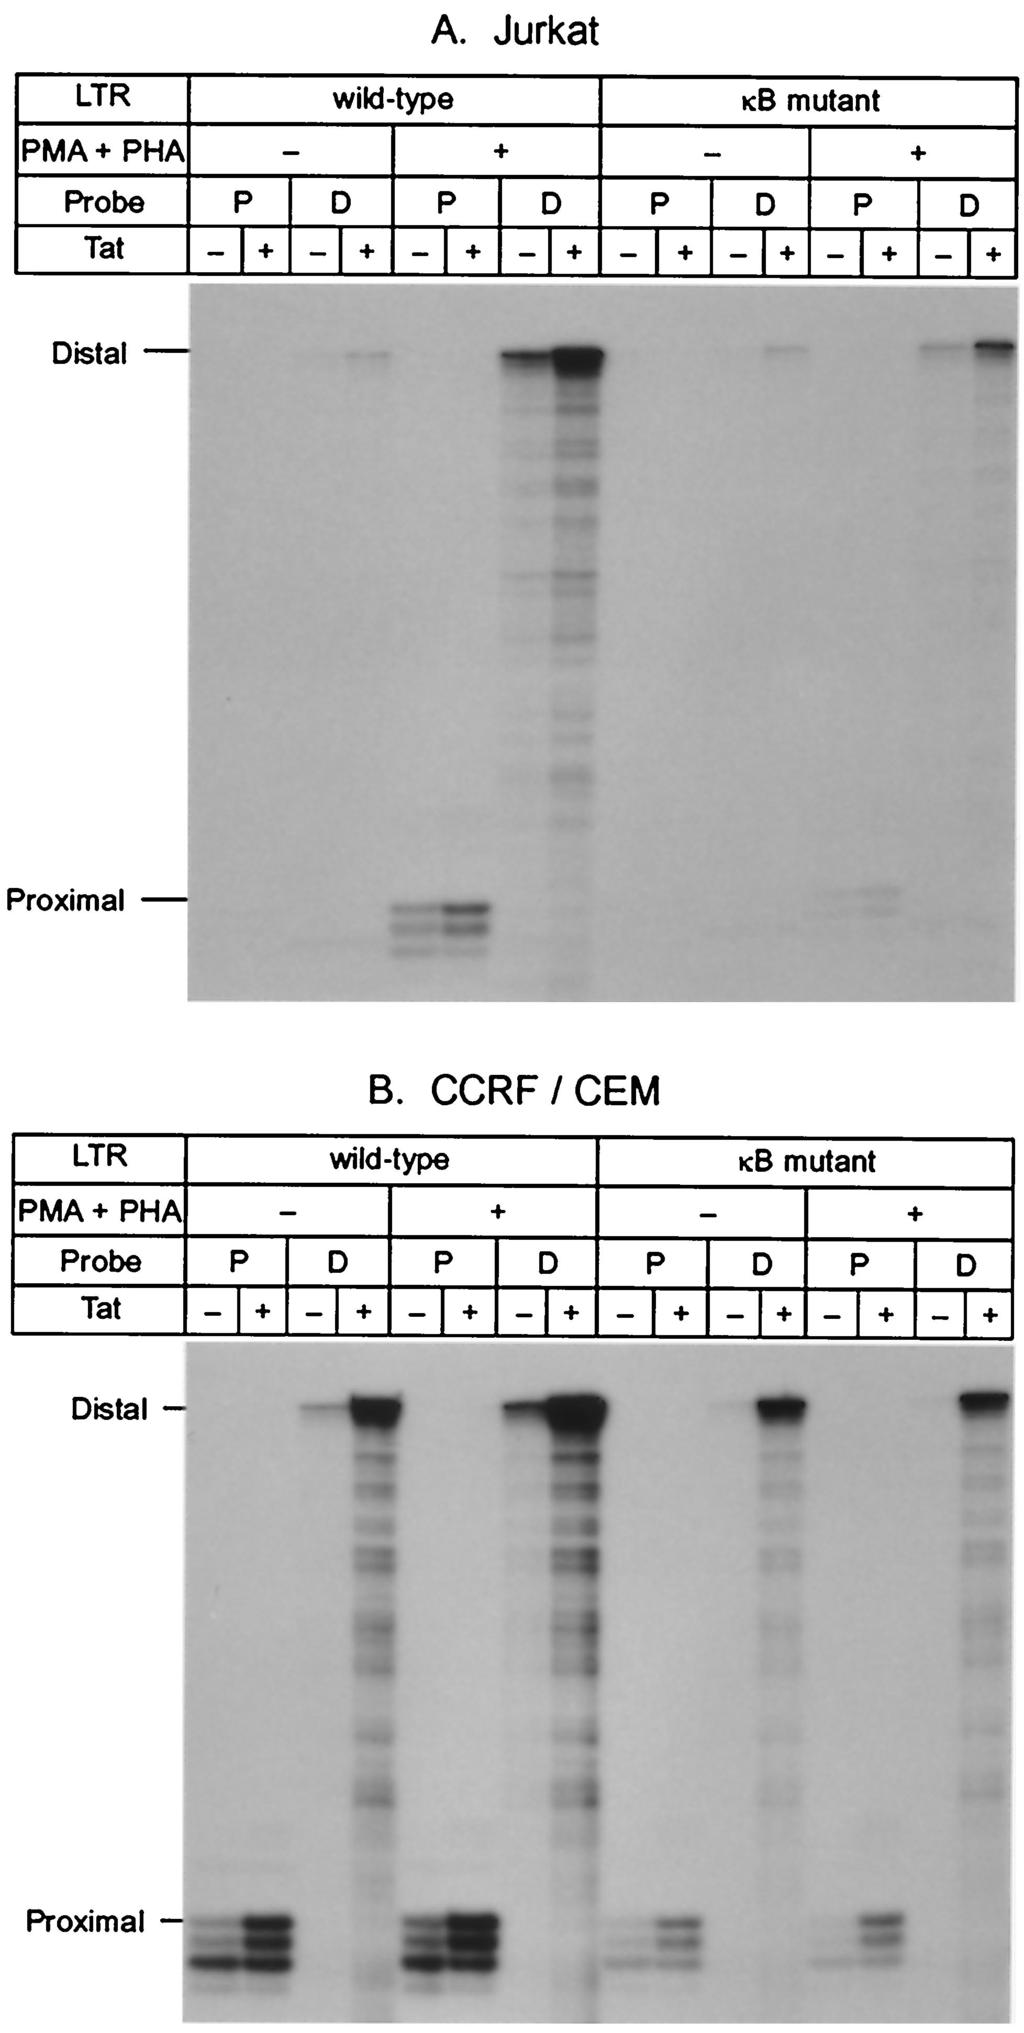 VOL. 75, 2001 NF- B p65 STIMULATES TRANSCRIPTIONAL ELONGATION 8529 FIG. 5. Western blot analysis of levels of the CDK9 and CycT1 proteins in Jurkat and CCRF/CEM cells after stimulation by PMA and PHA.